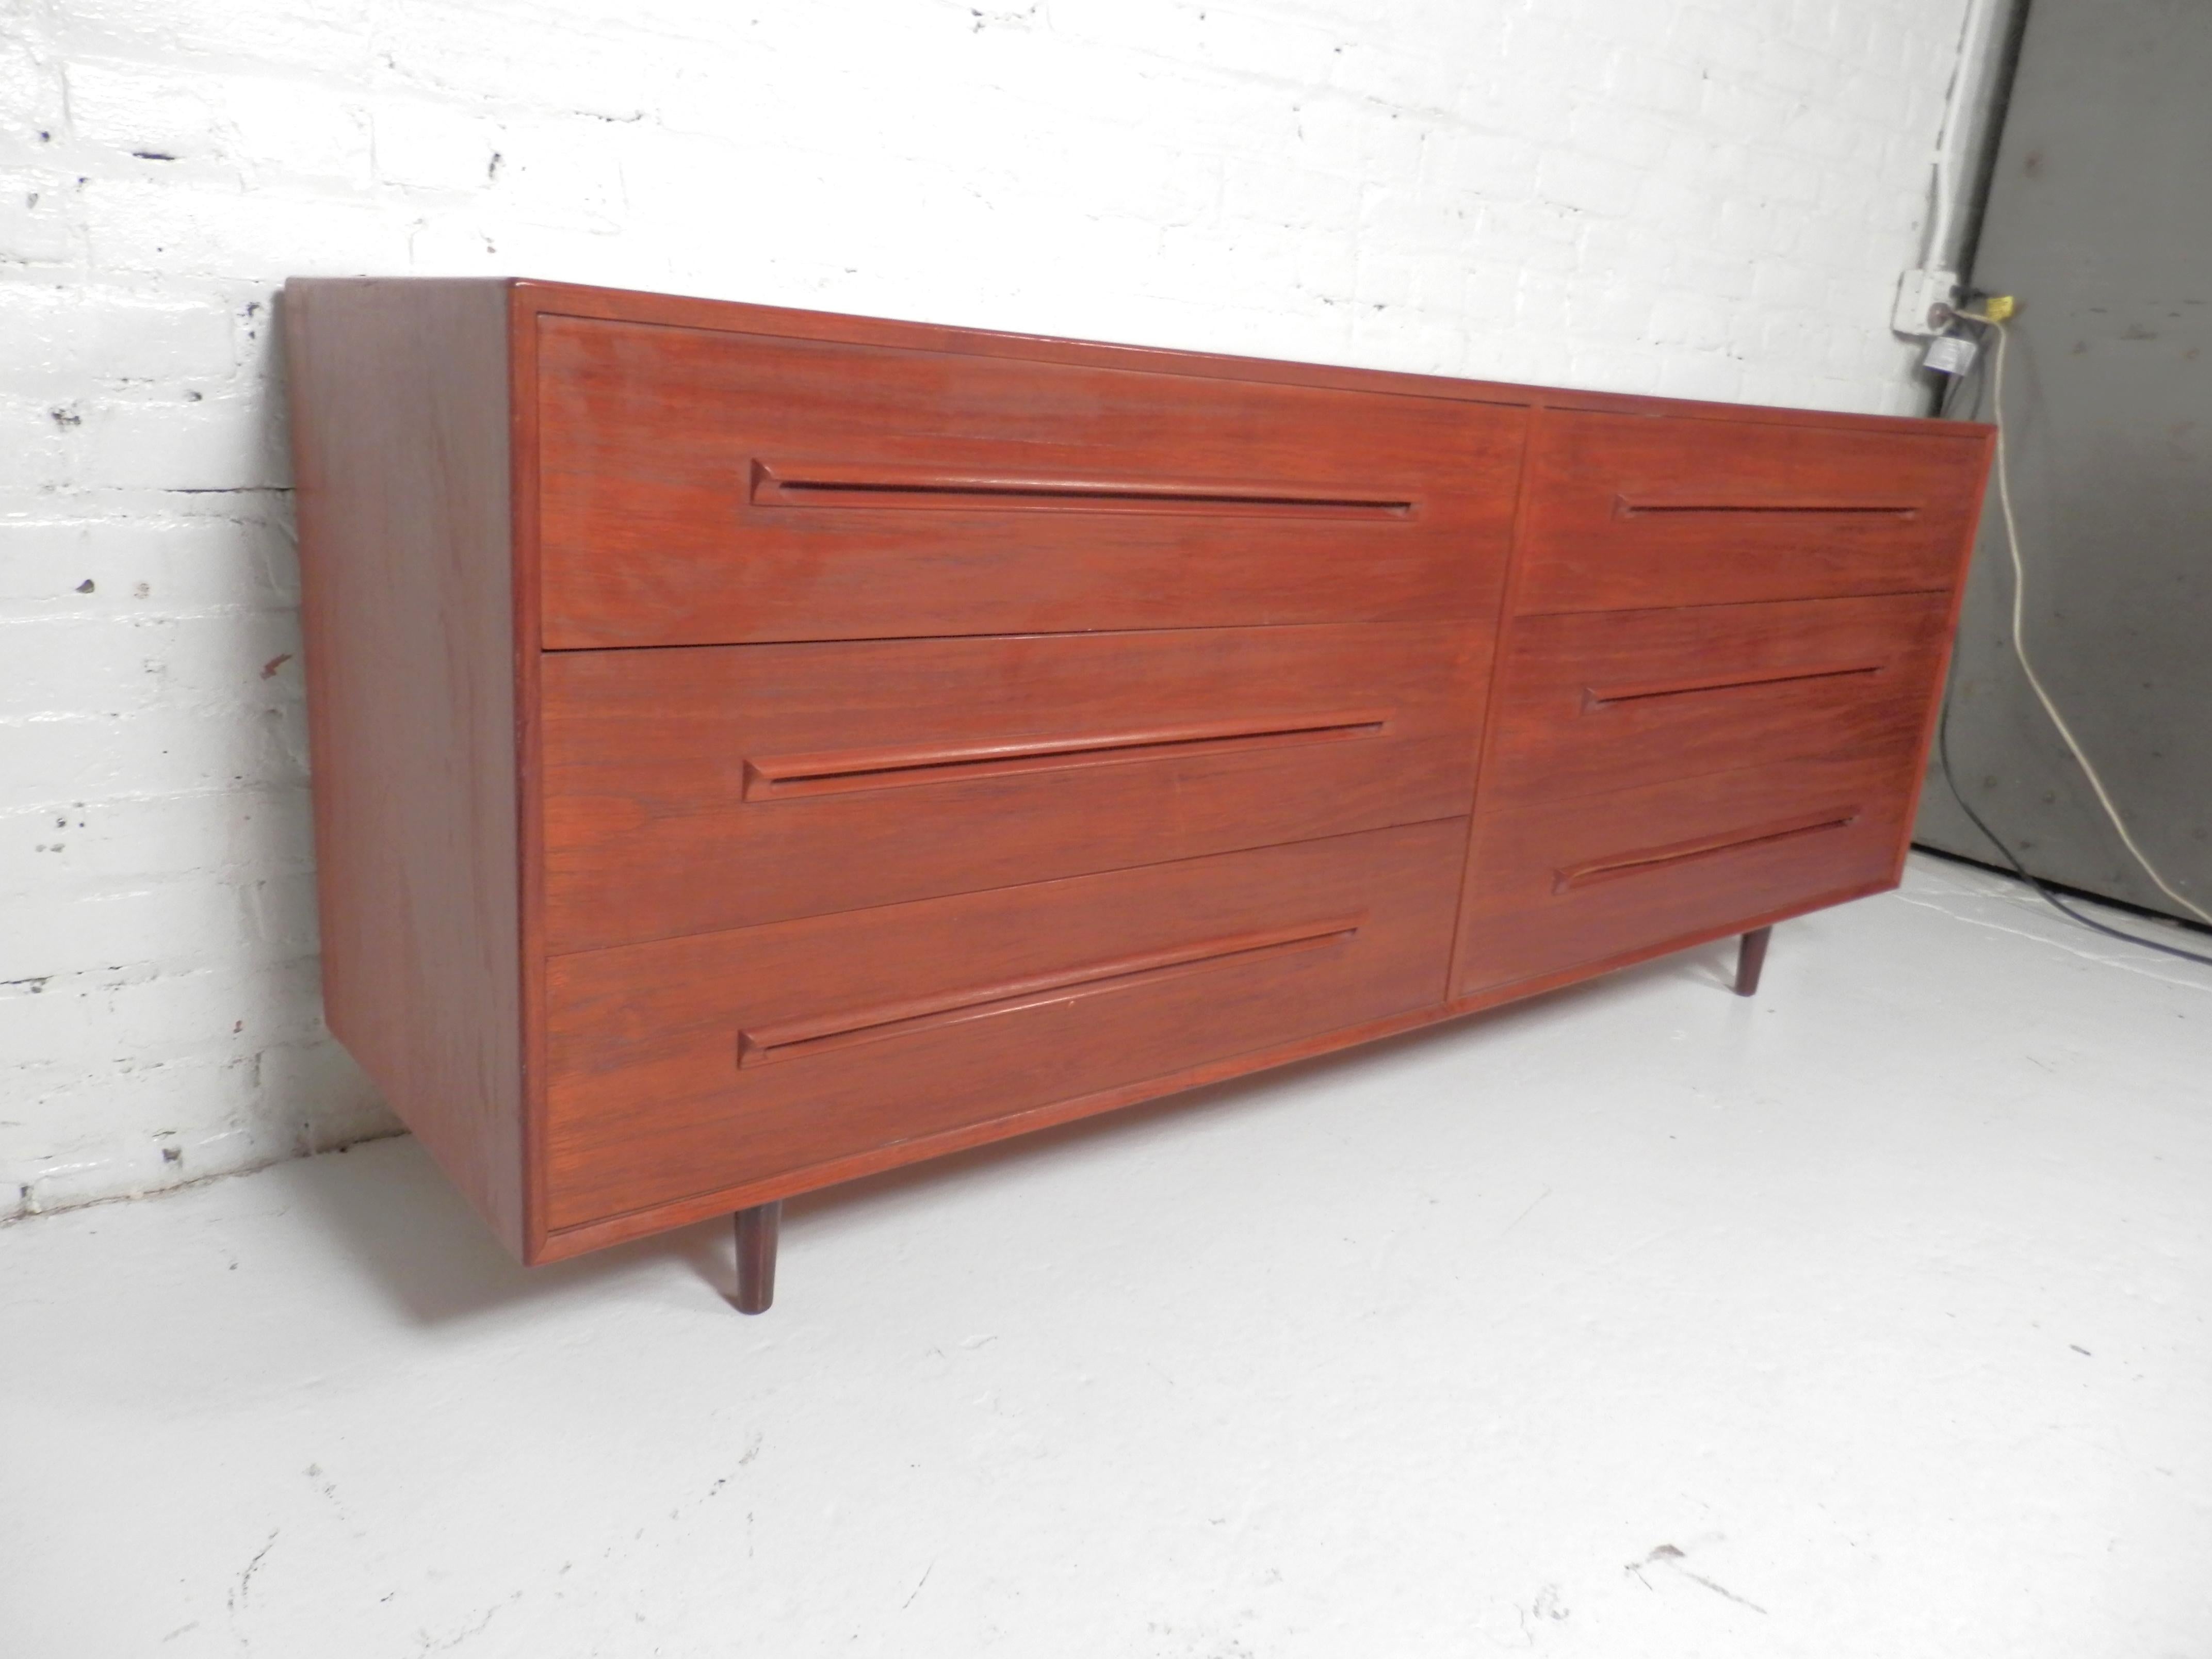 Sleek Mid-Century Modern double dresser by Westnofa. All teak grain six drawer dresser with sculpted wood handles and tapered legs.
Please confirm location.
 